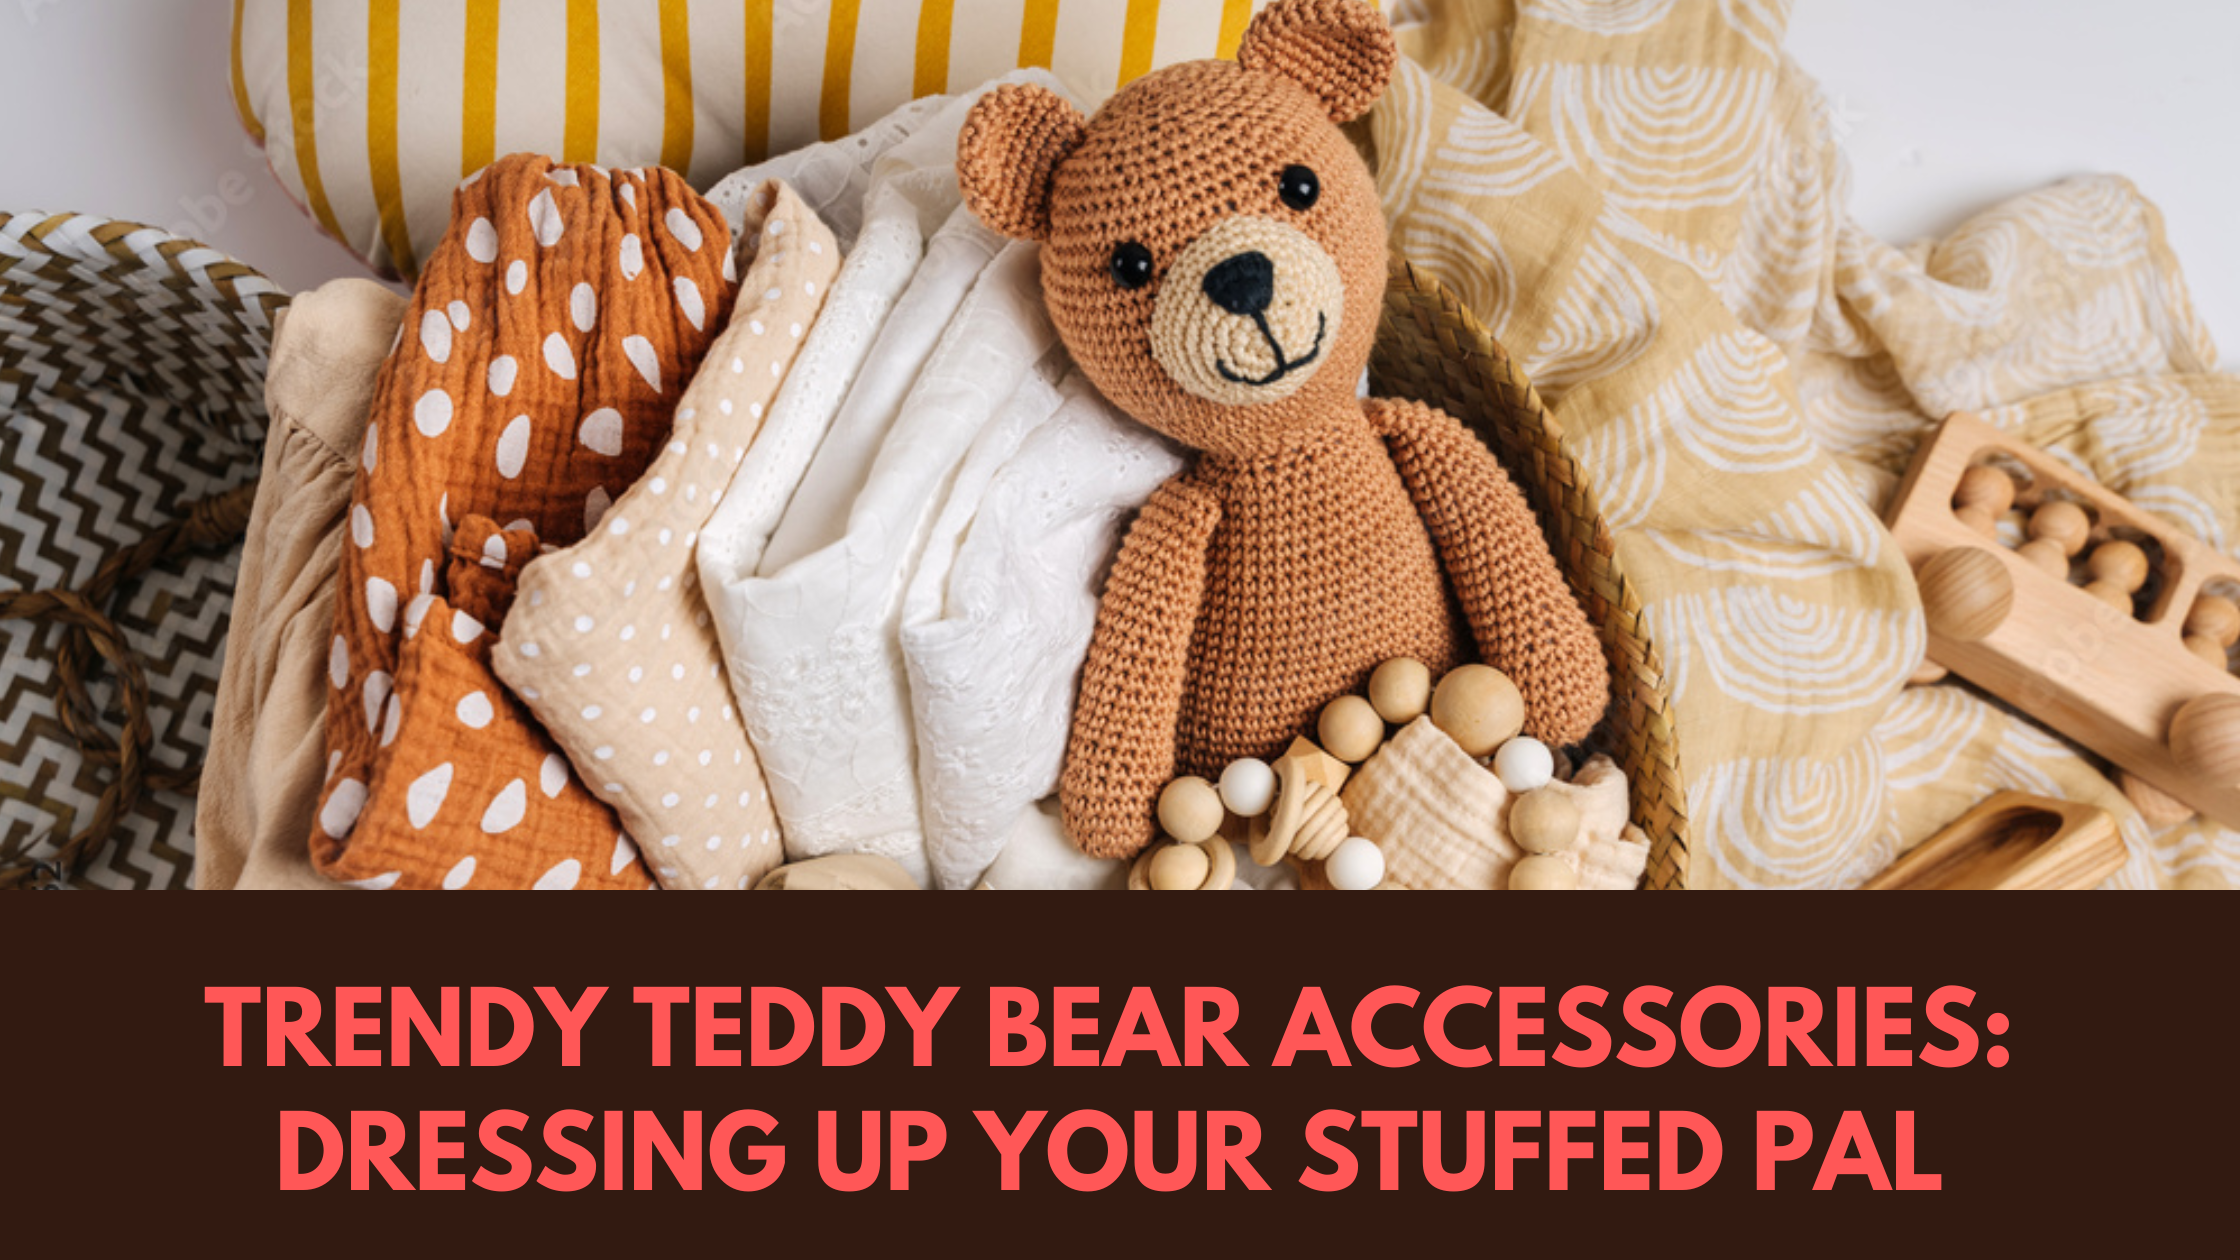 Trendy Teddy Bear Accessories: Dressing Up Your Stuffed Pal